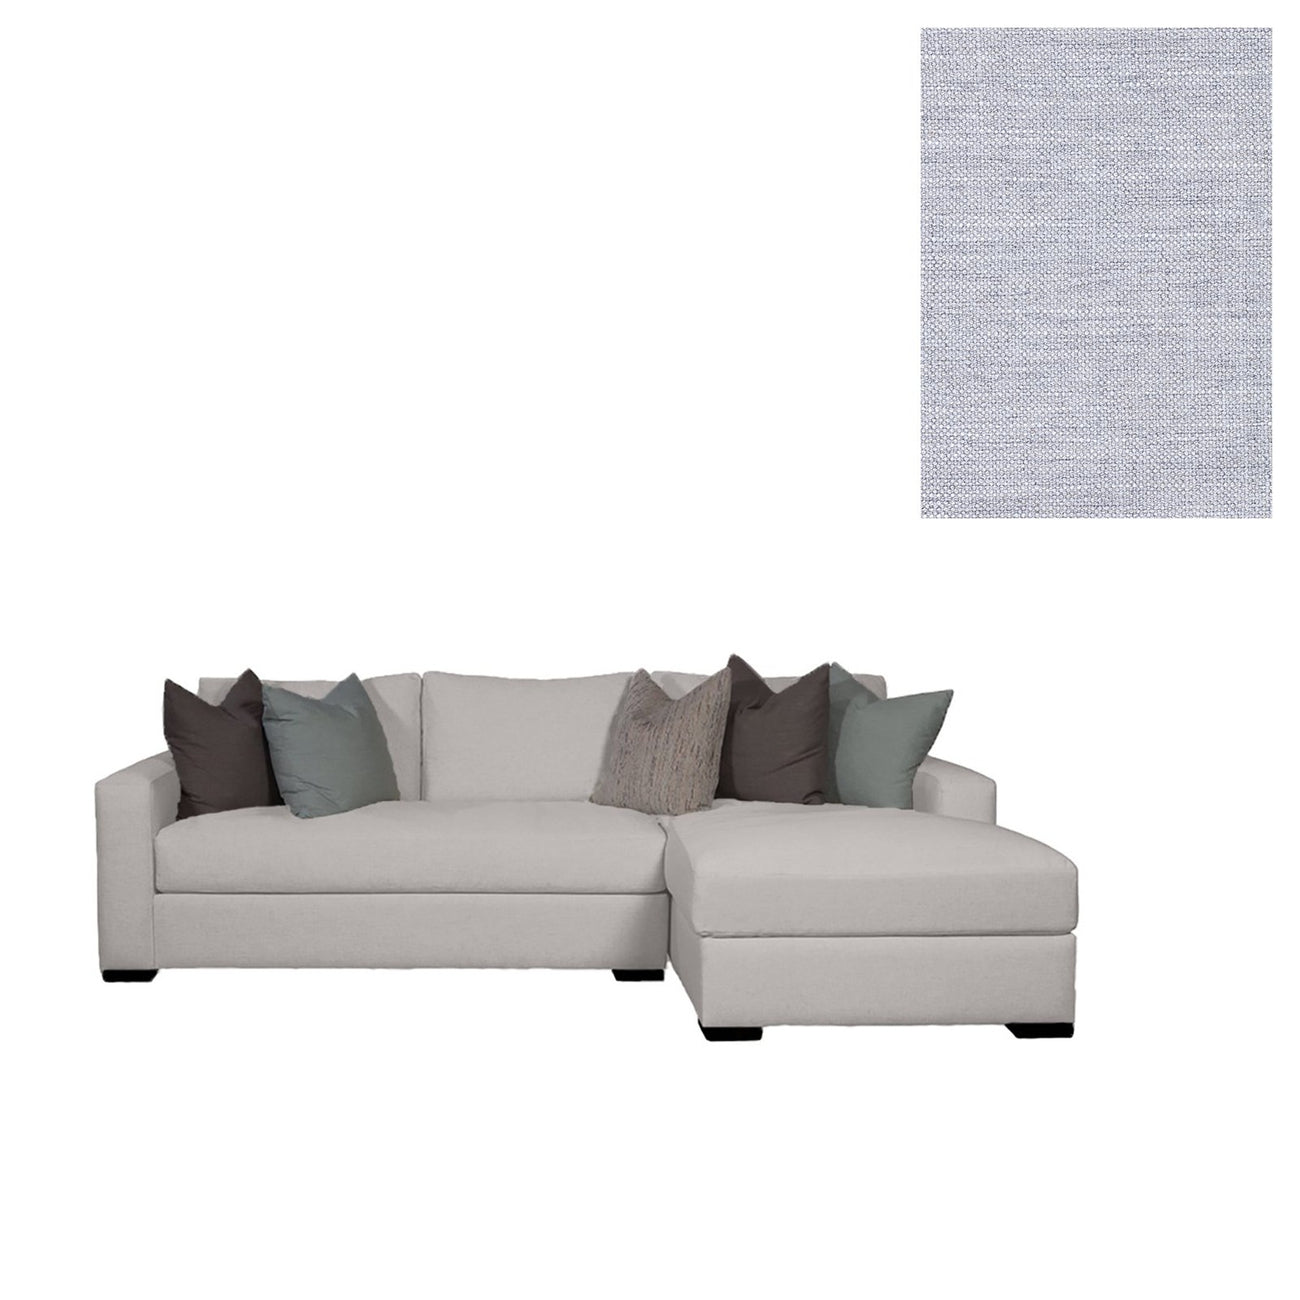 Gia Sectional-Younger-YNGR-49536-49562-2810-SC-SectionalsLeft Arm Facing Chaise-Standard Cushion-Viscose/Cotton/Linen/Polyester-2810-27-France and Son